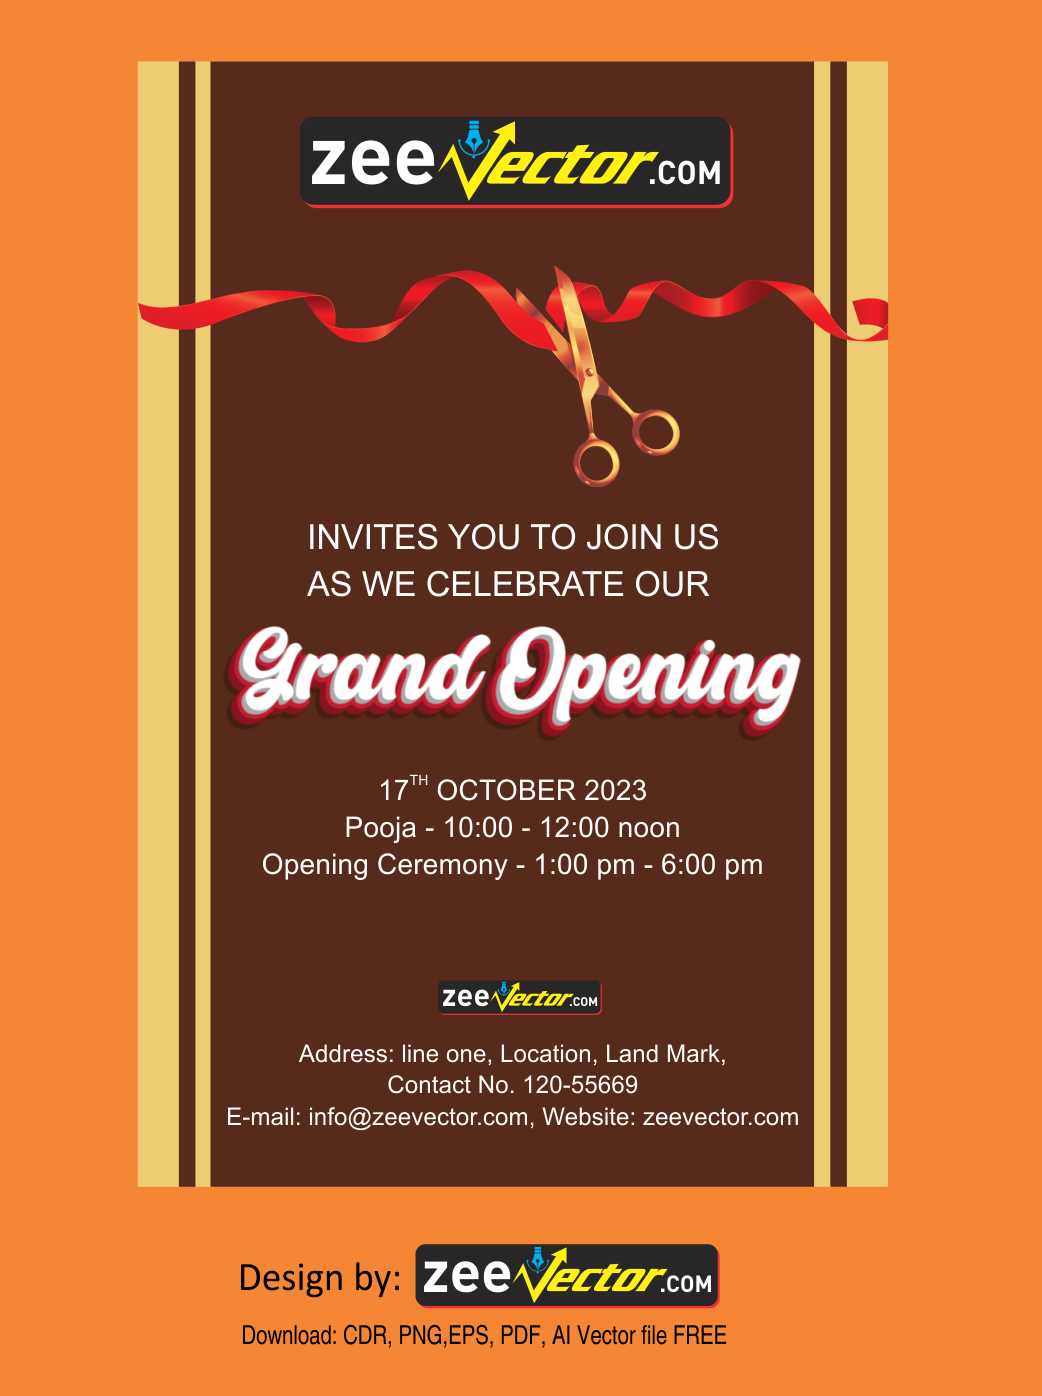 Invitation-Cards-for-Grand-Opening-Free-Vector